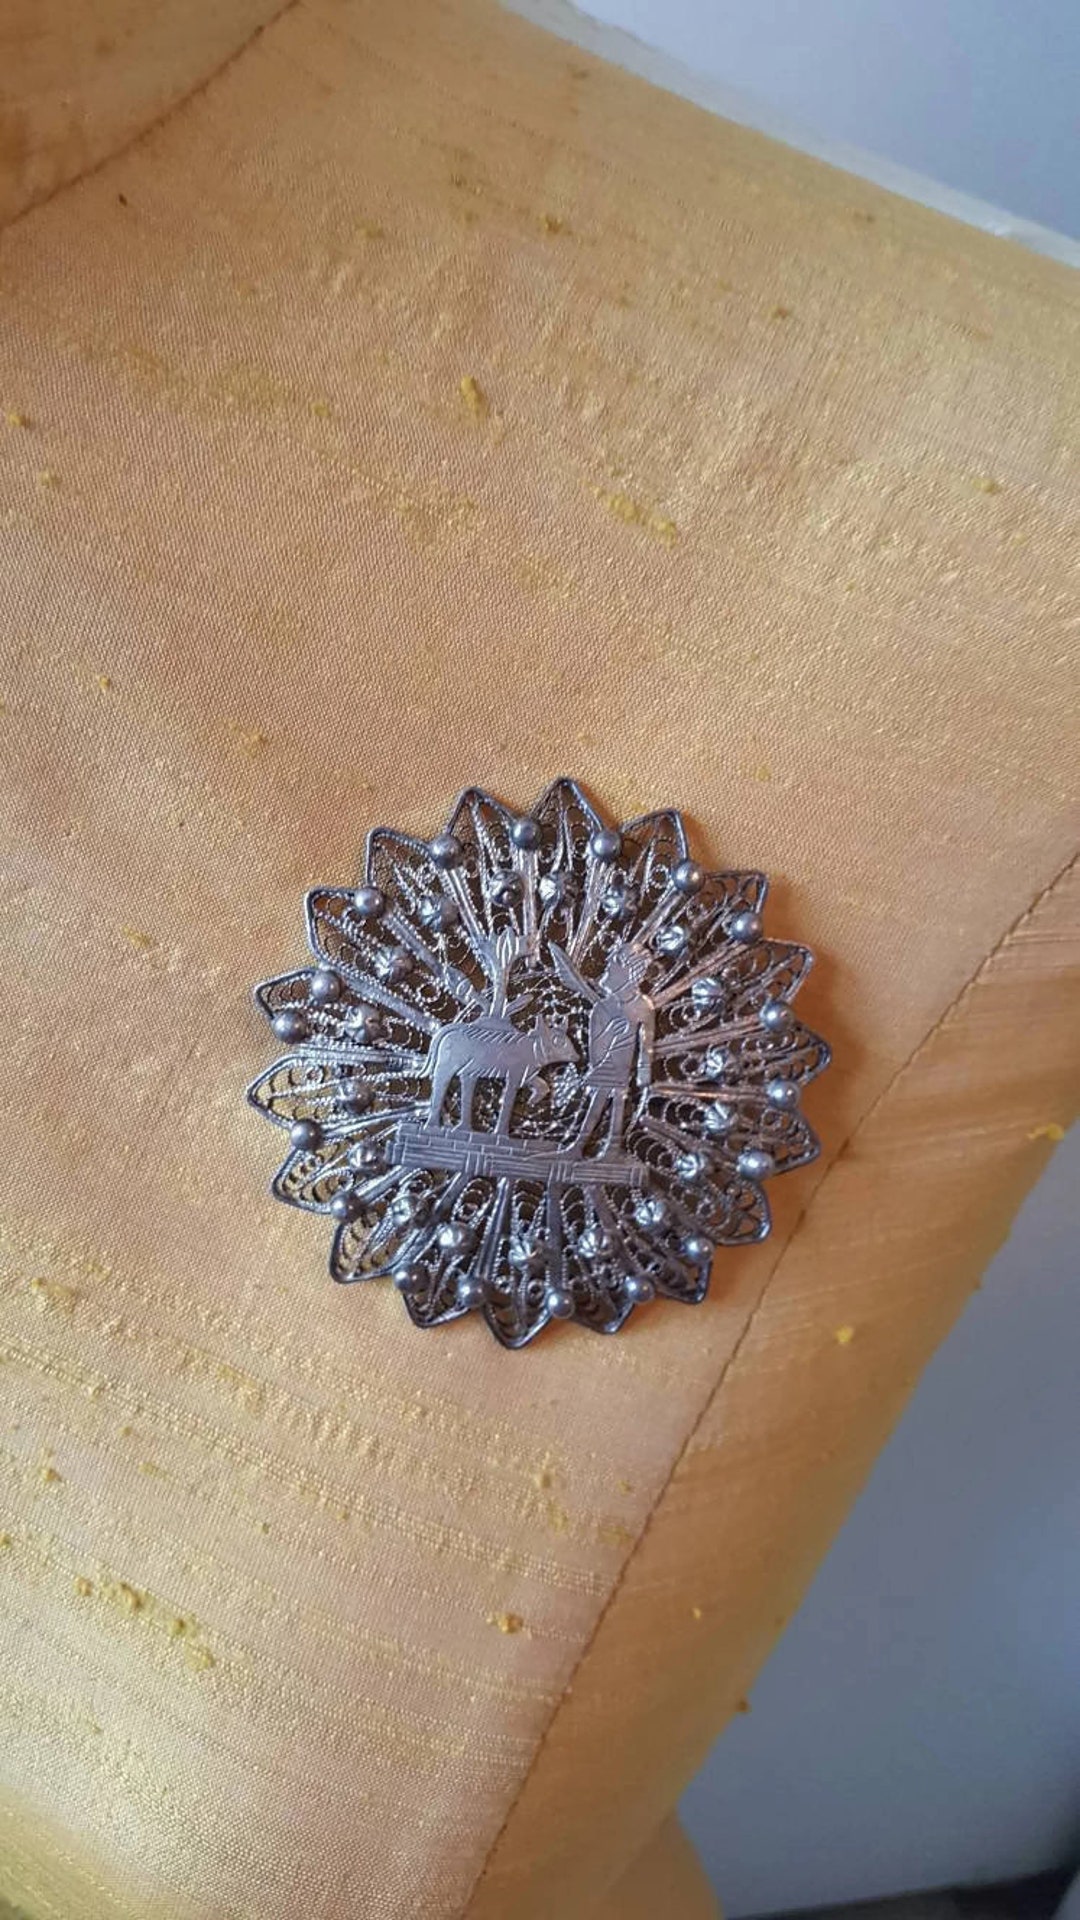 Rare Antique Egyptian Brooch From 1920s Silver Filigree - Etsy Sweden